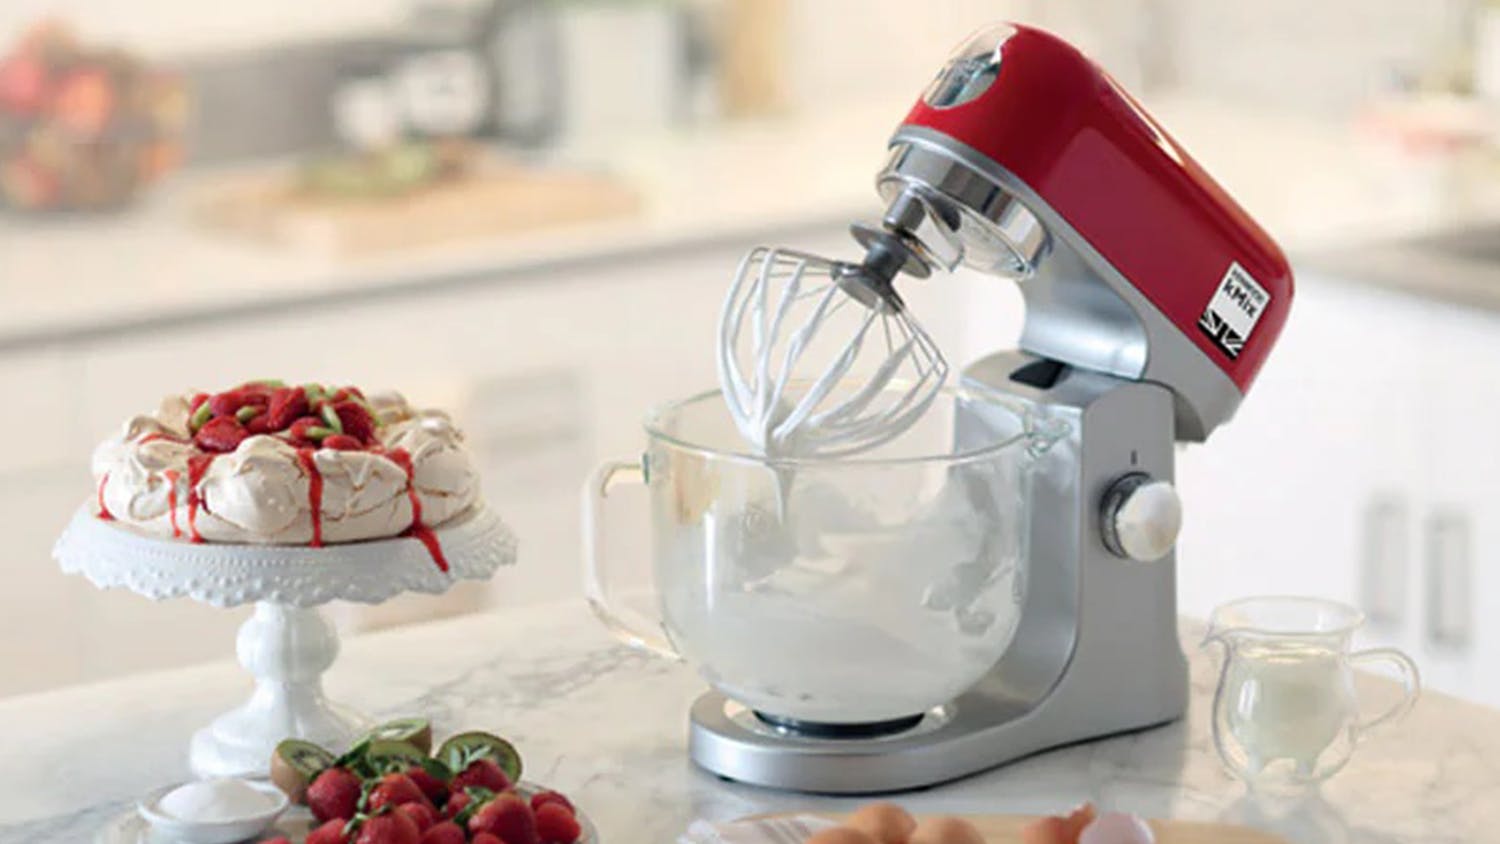 Kenwood kMix Stand Mixer - Spicy Red